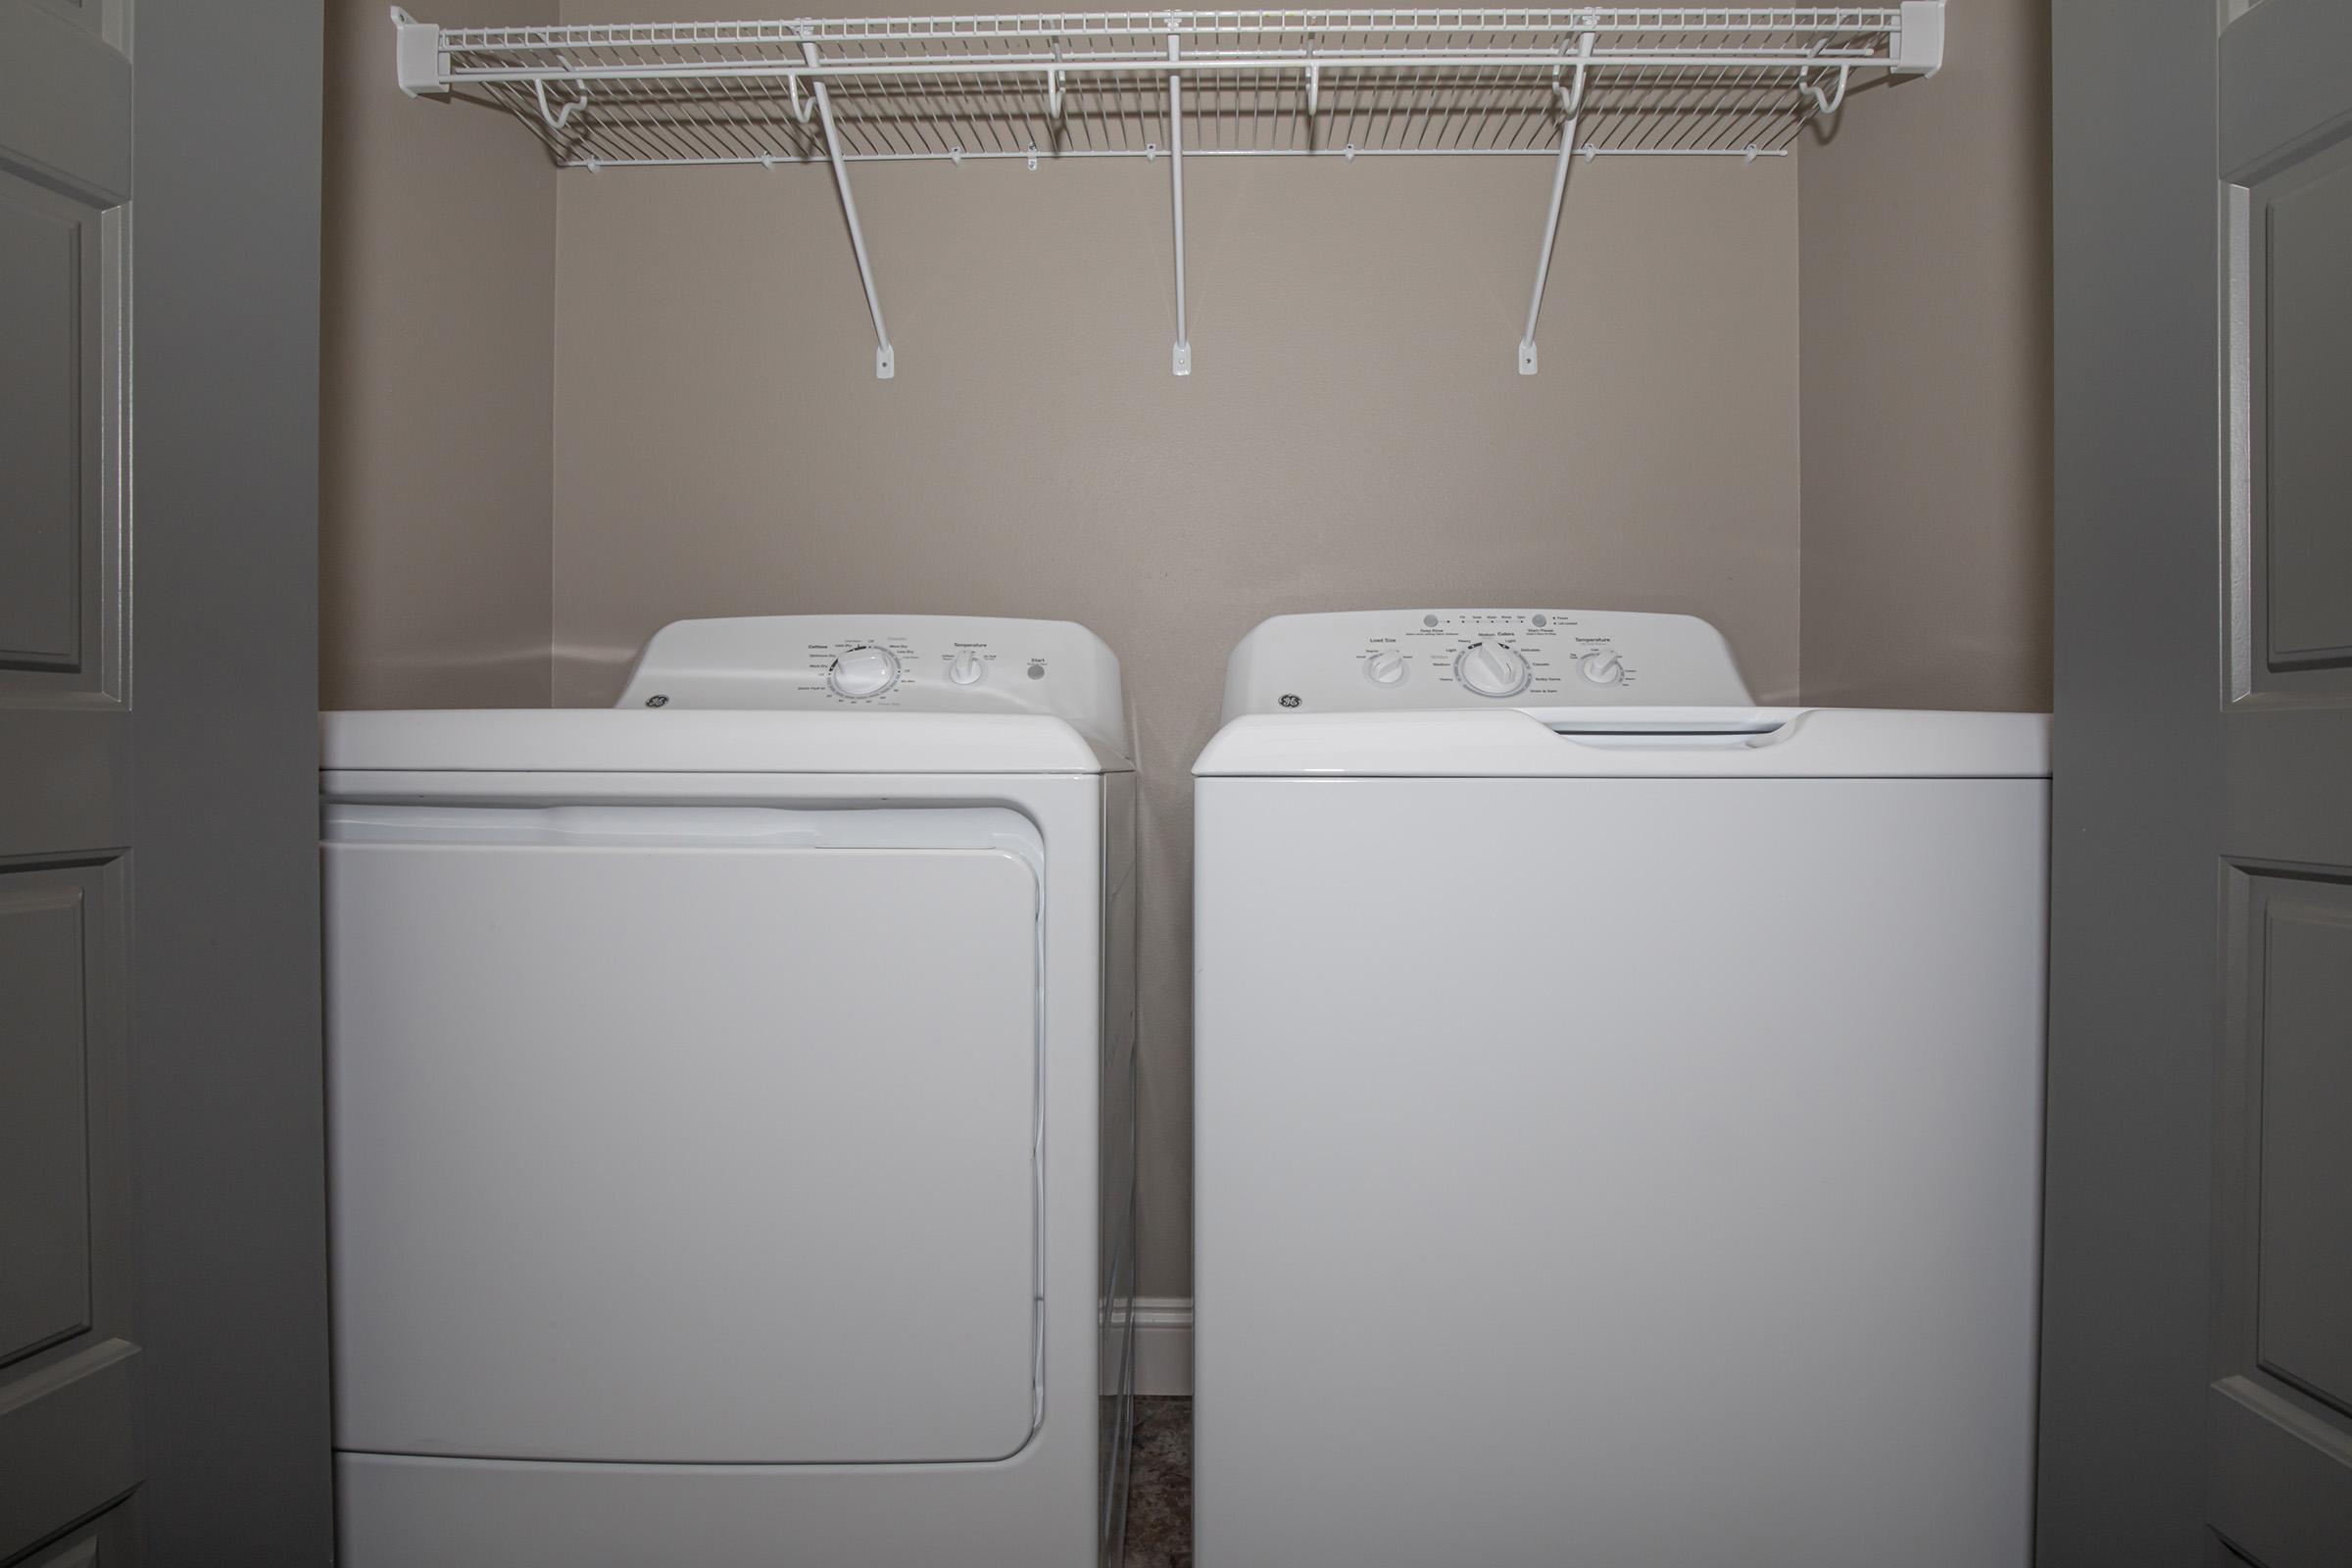 ENJOY YOUR IN-HOME WASHER AND DRYER